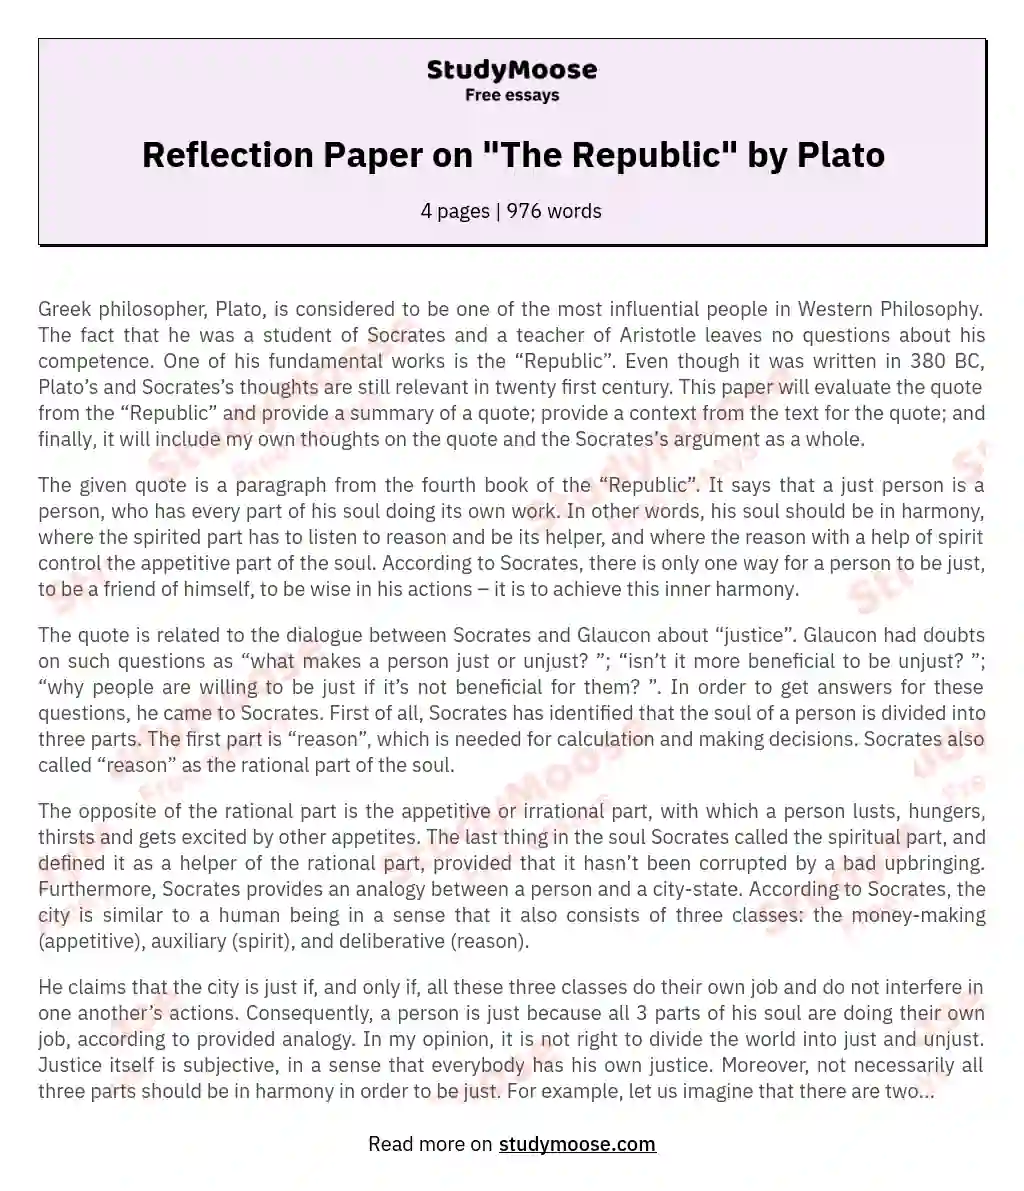 Reflection Paper on "The Republic" by Plato essay